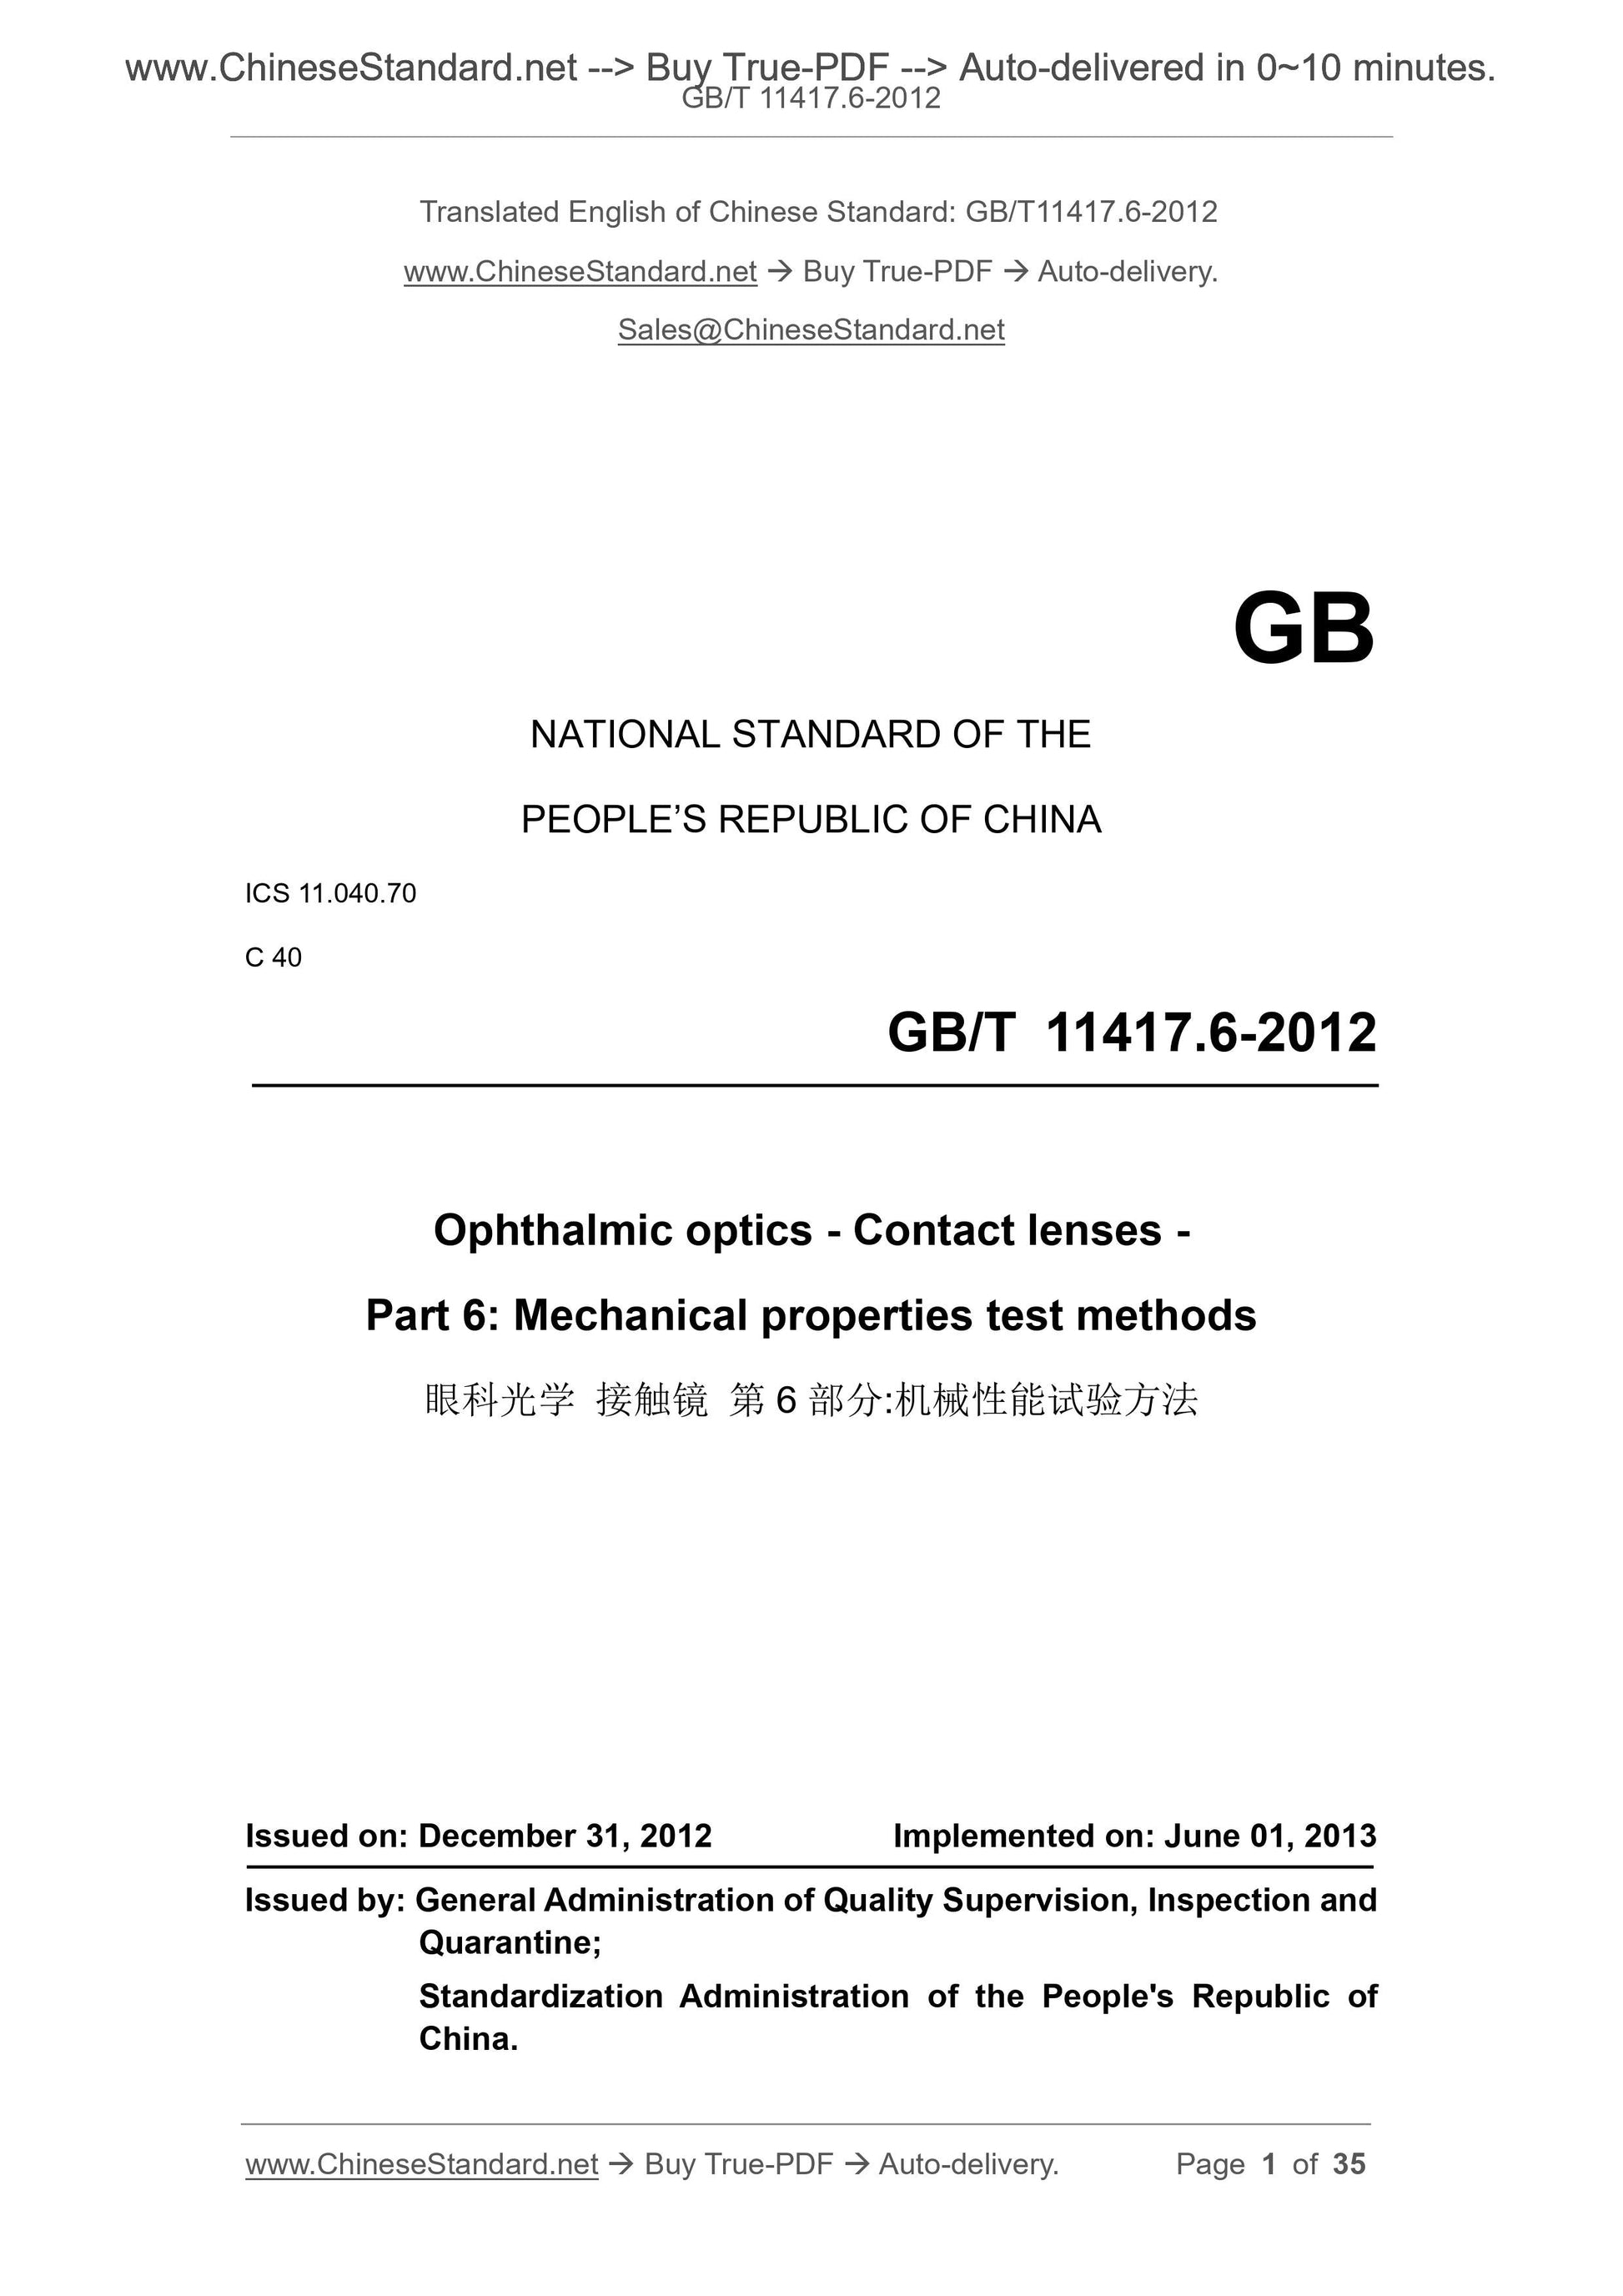 GB/T 11417.6-2012 Page 1